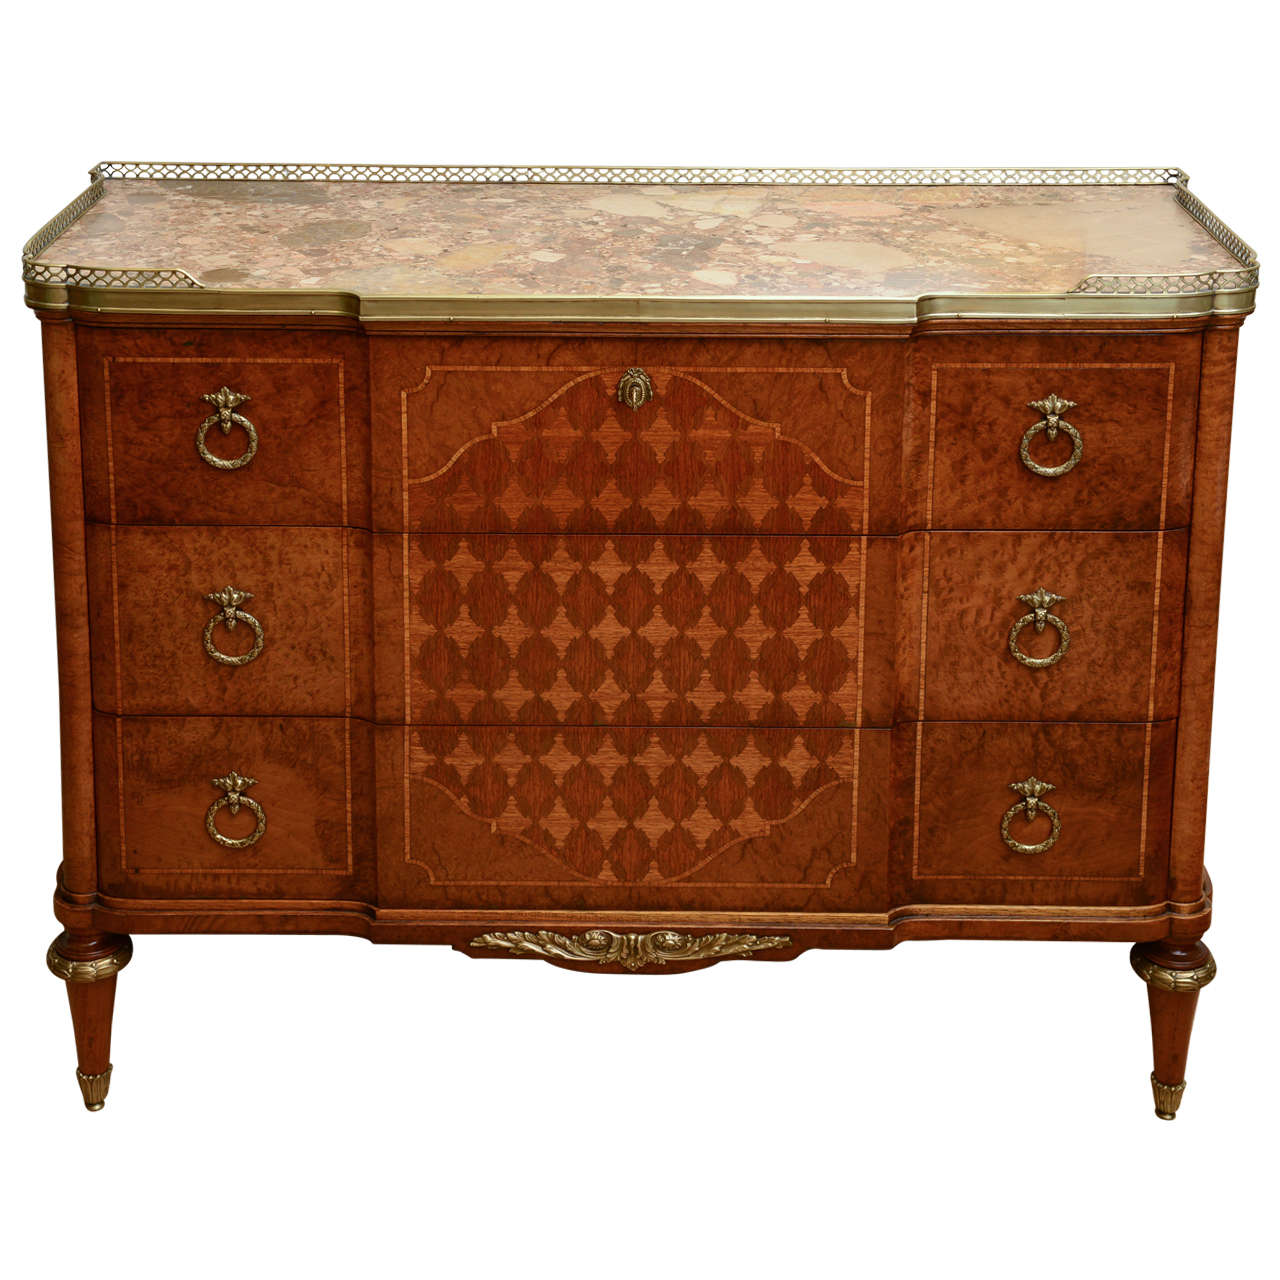 19c. French Parquetry Secretaire / Commode